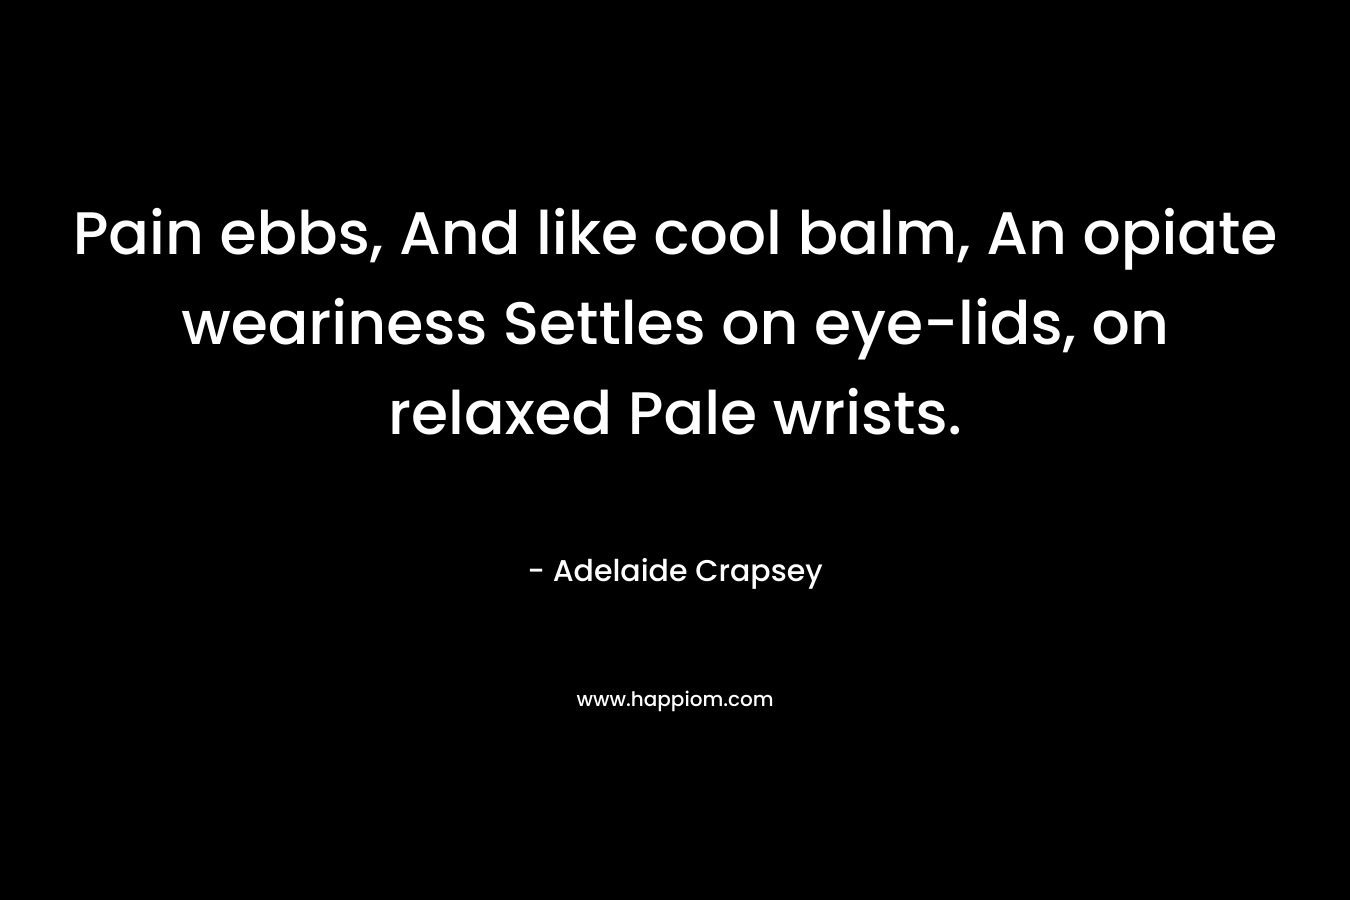 Pain ebbs, And like cool balm, An opiate weariness Settles on eye-lids, on relaxed Pale wrists.